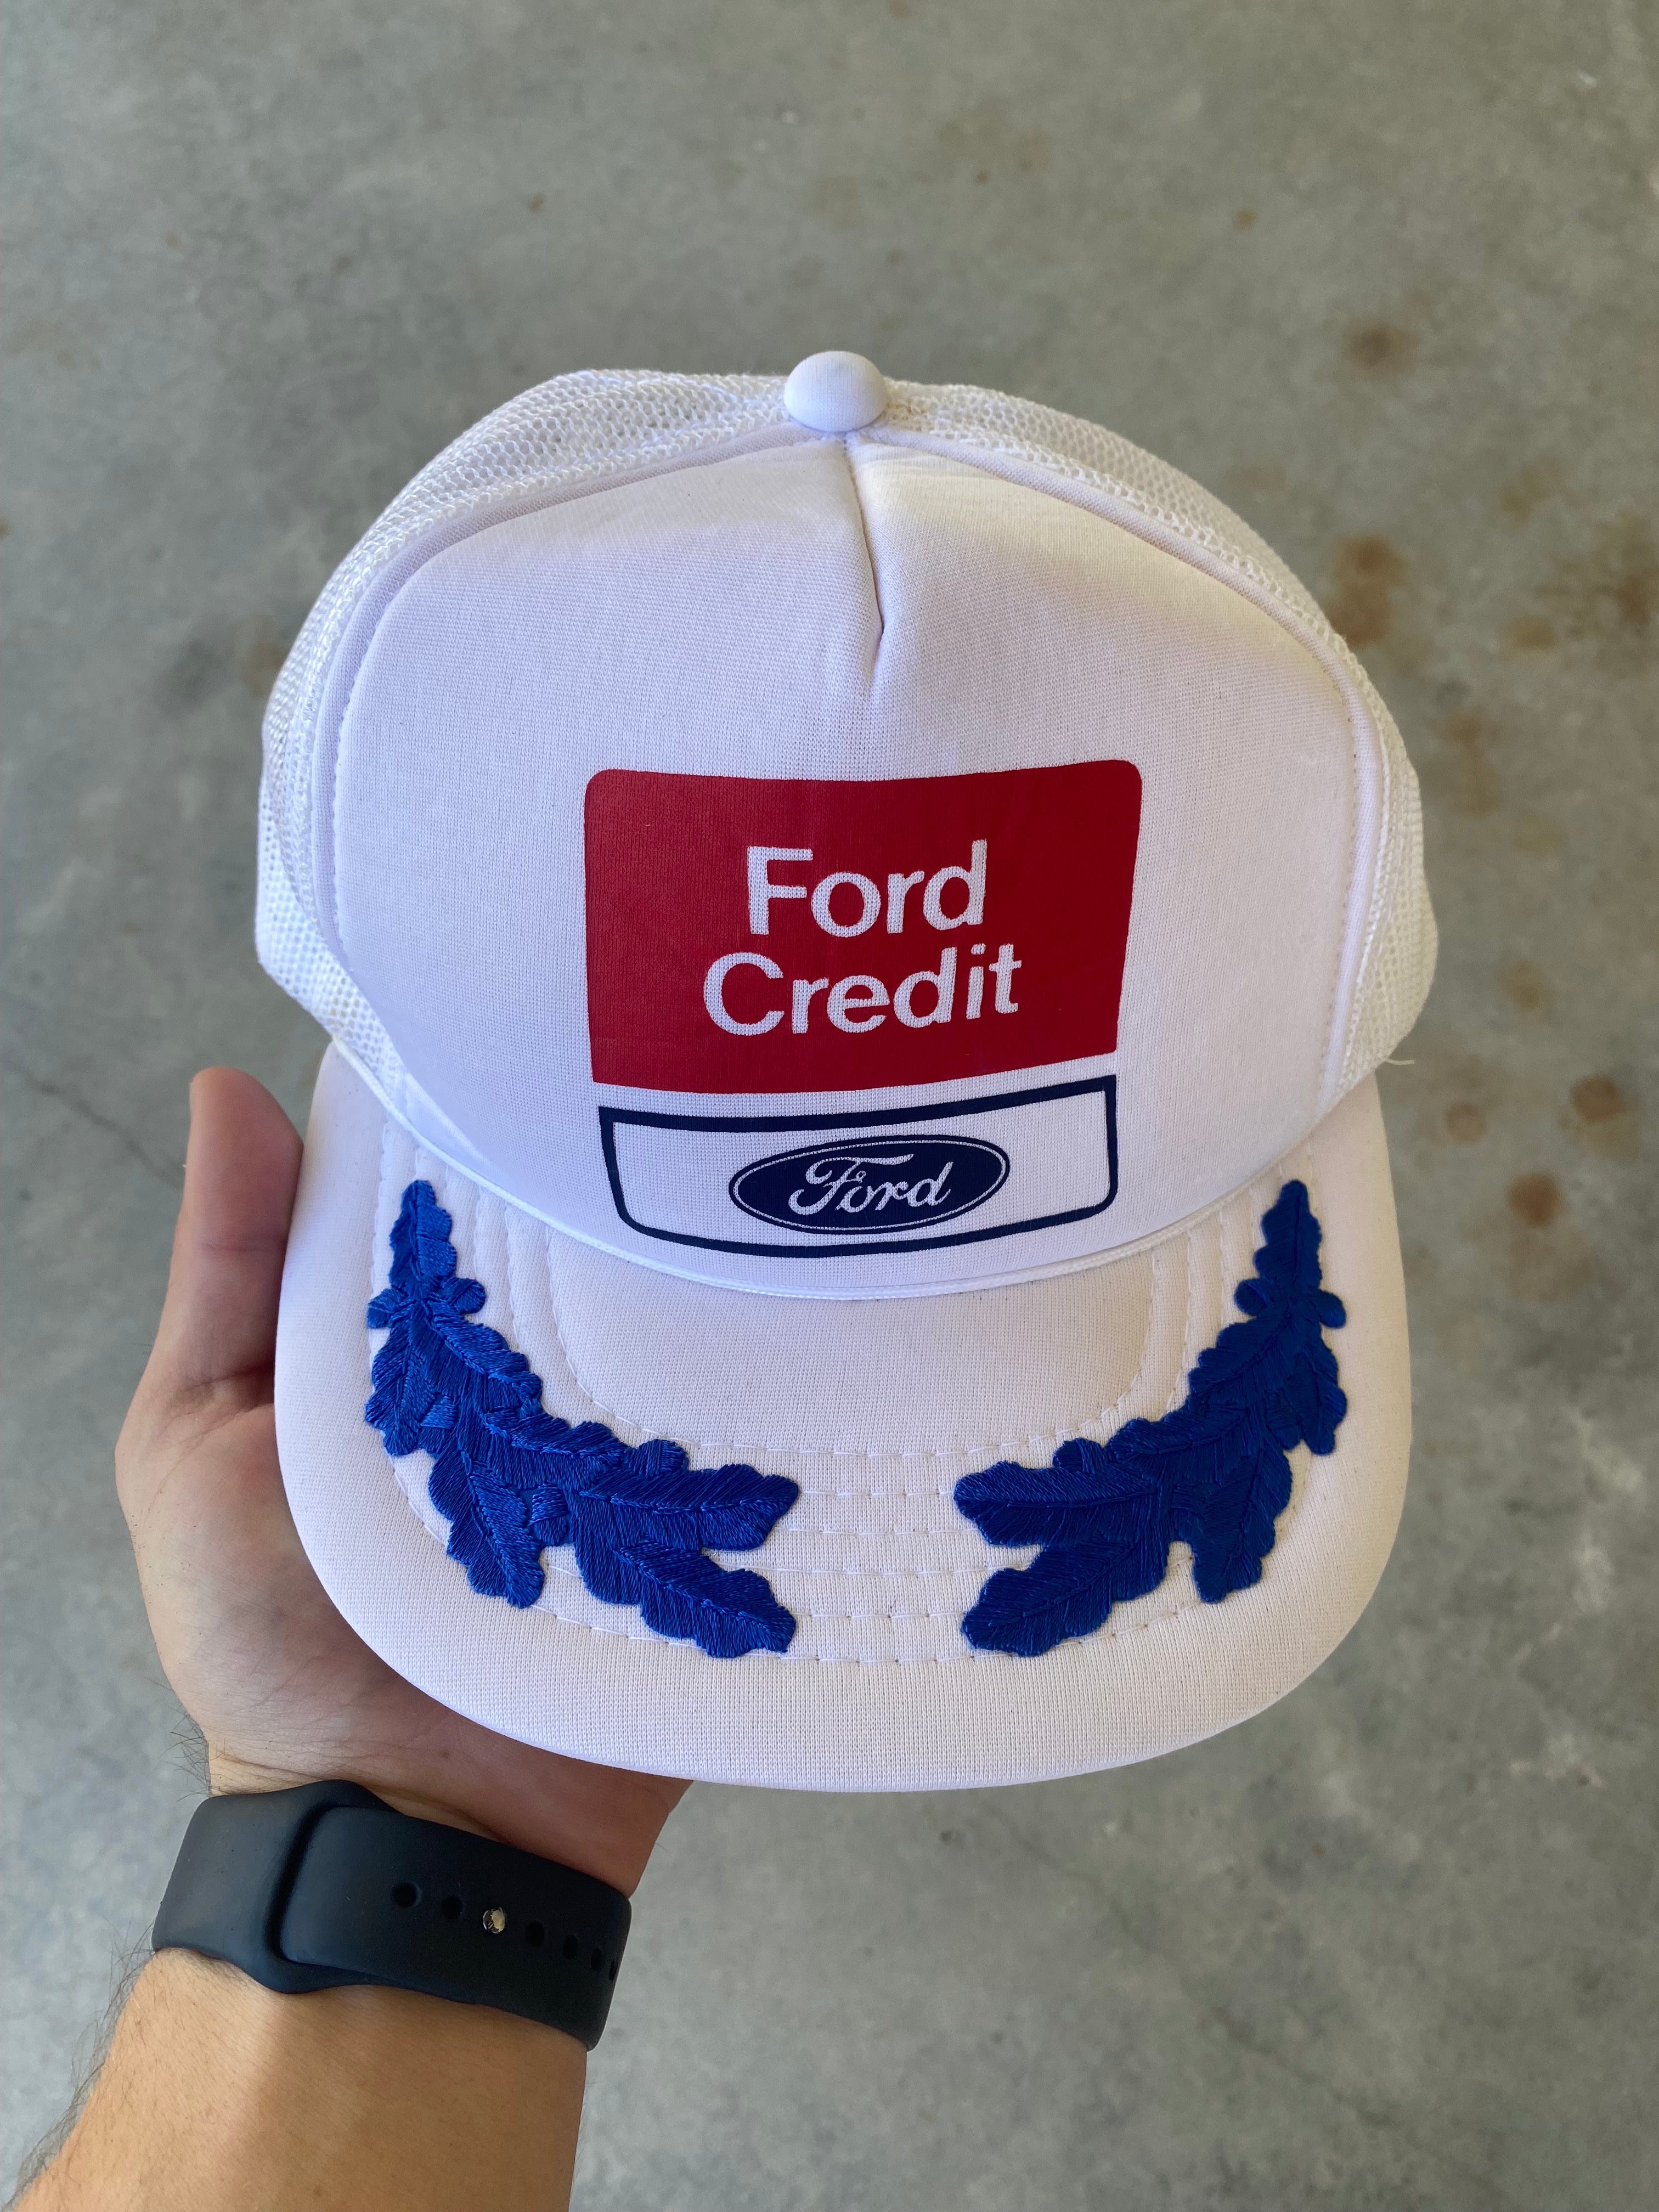 1980s Ford Credit Trucker Hat